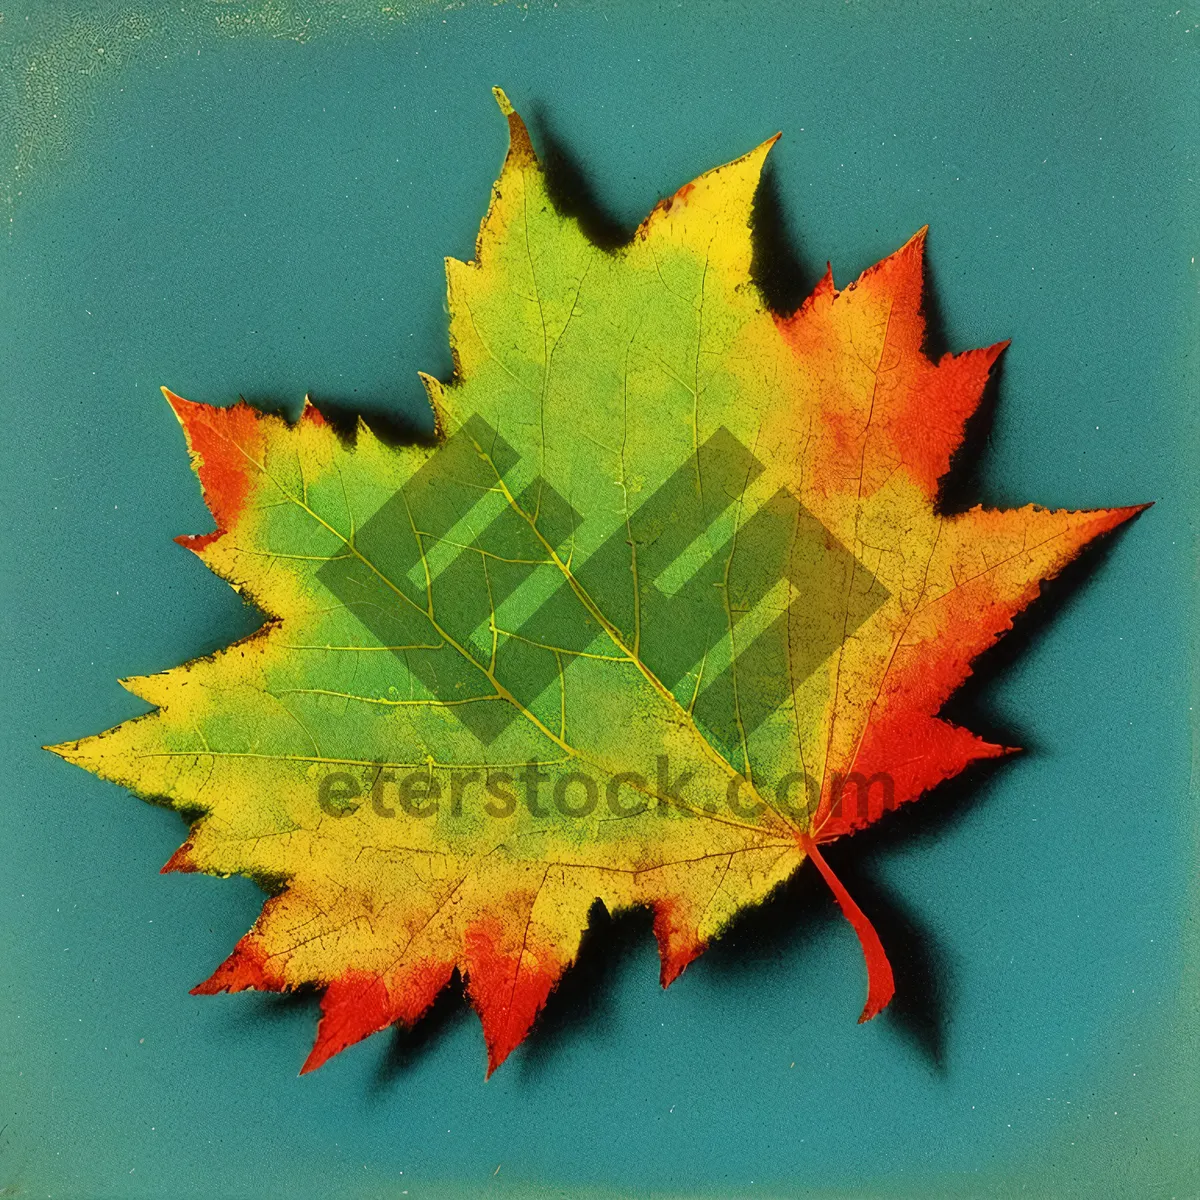 Picture of Vibrant Fall Foliage in Maple and Oak Trees